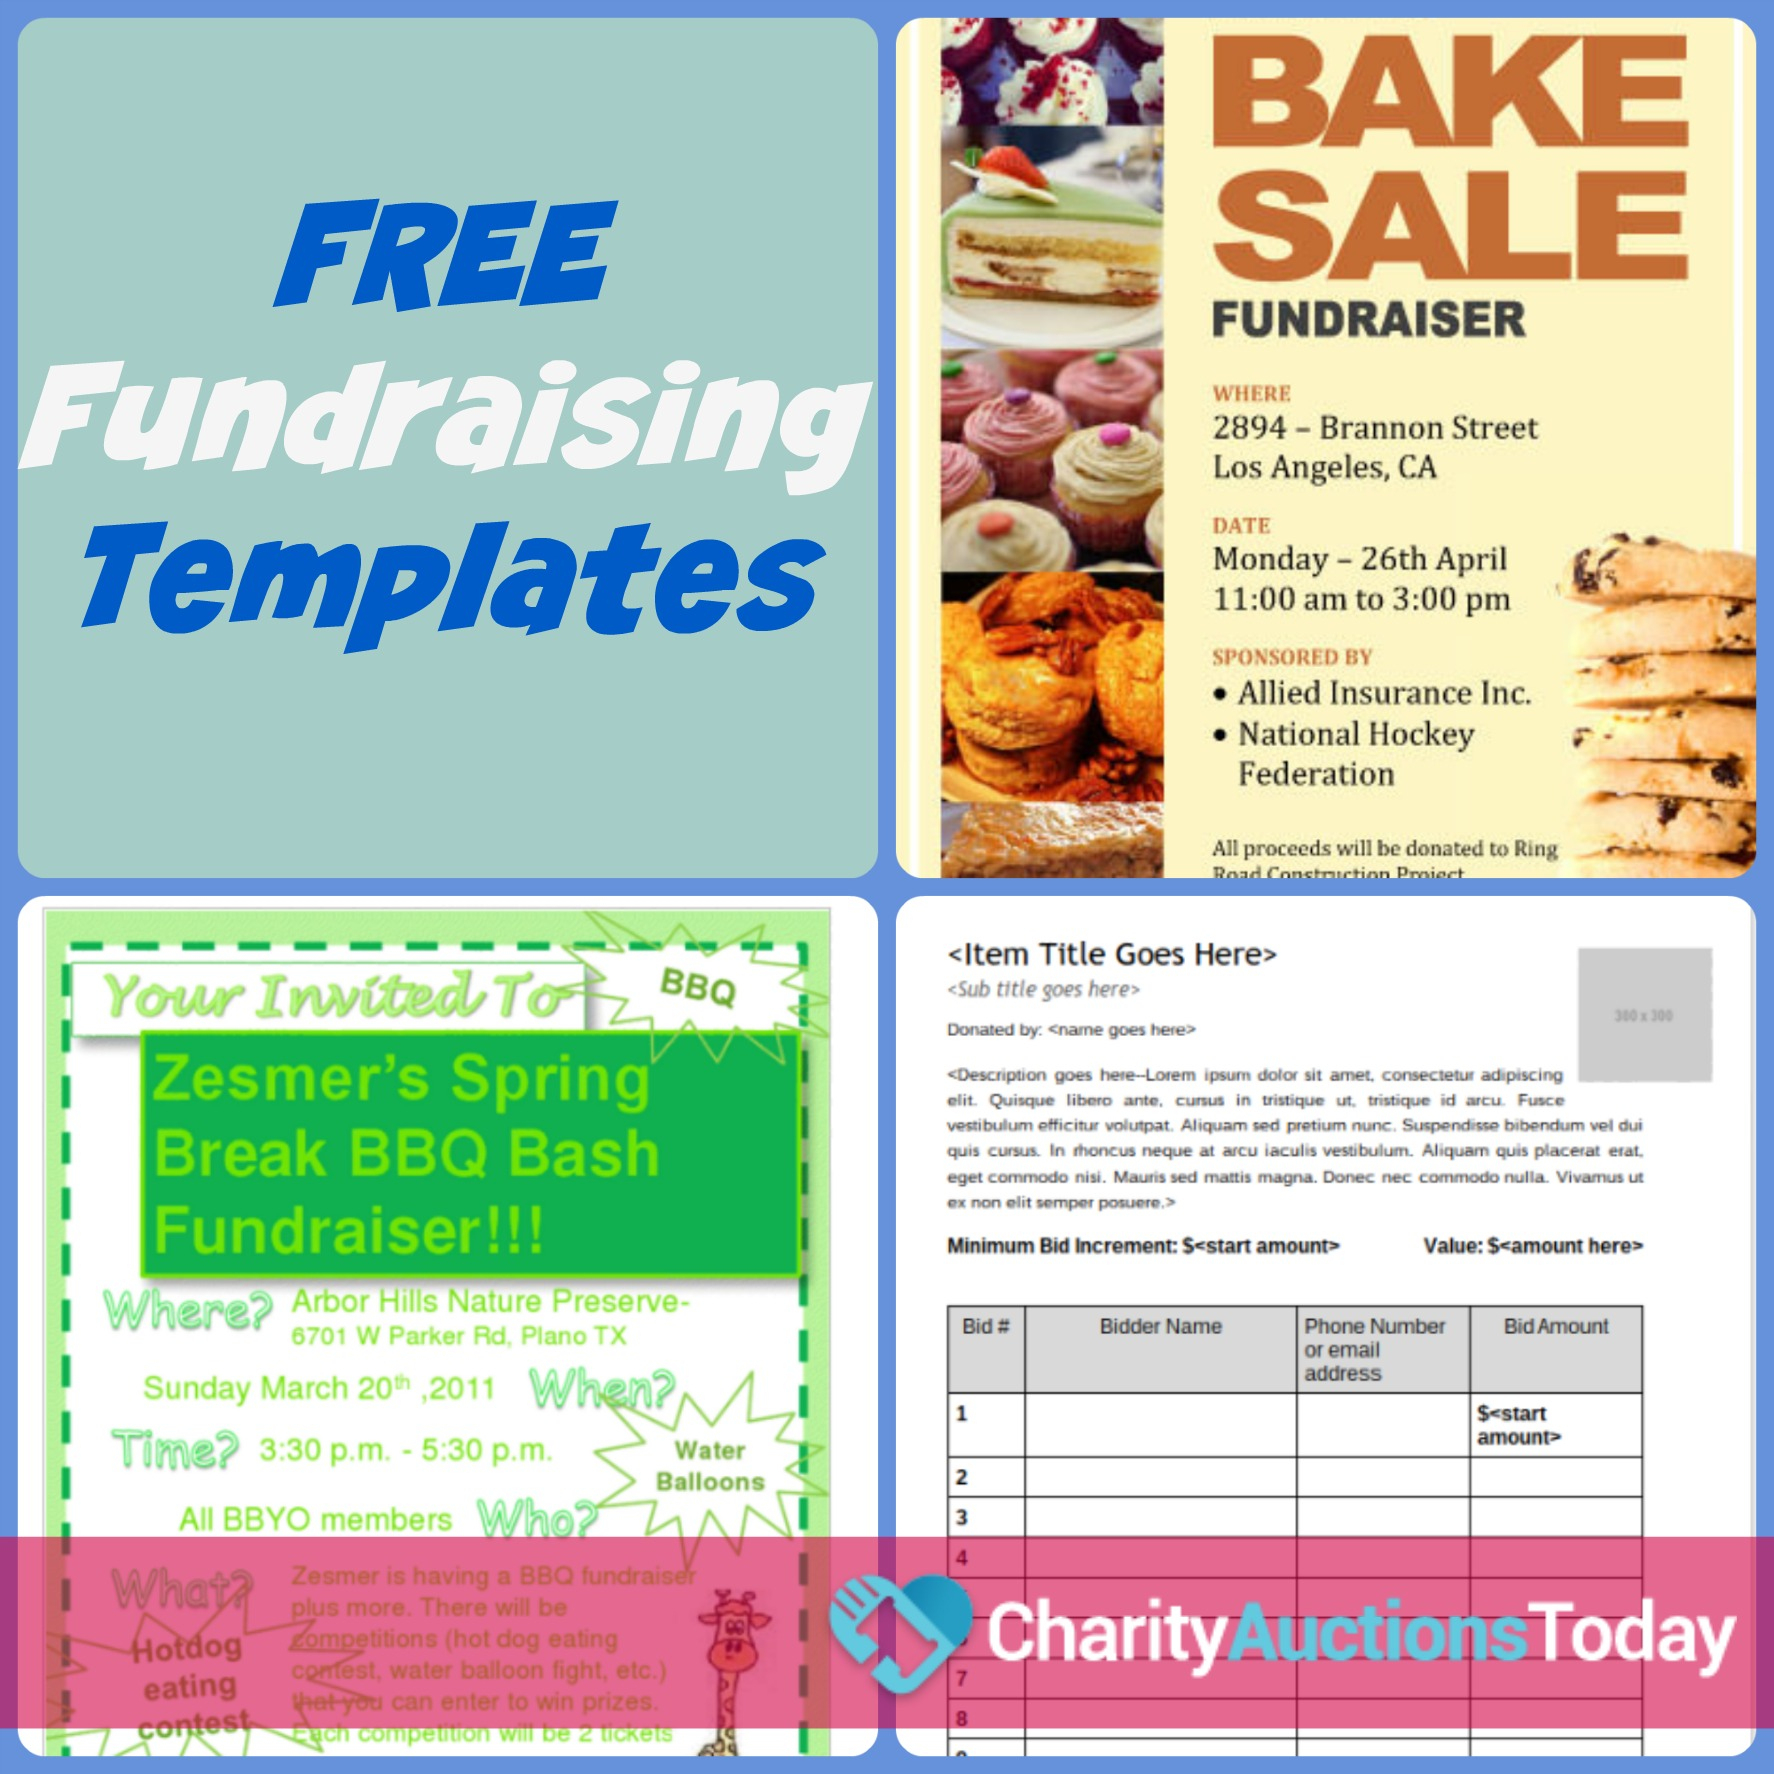 Free Fundraiser Flyer | Charity Auctions Today - Create Flyers Online Free Printable